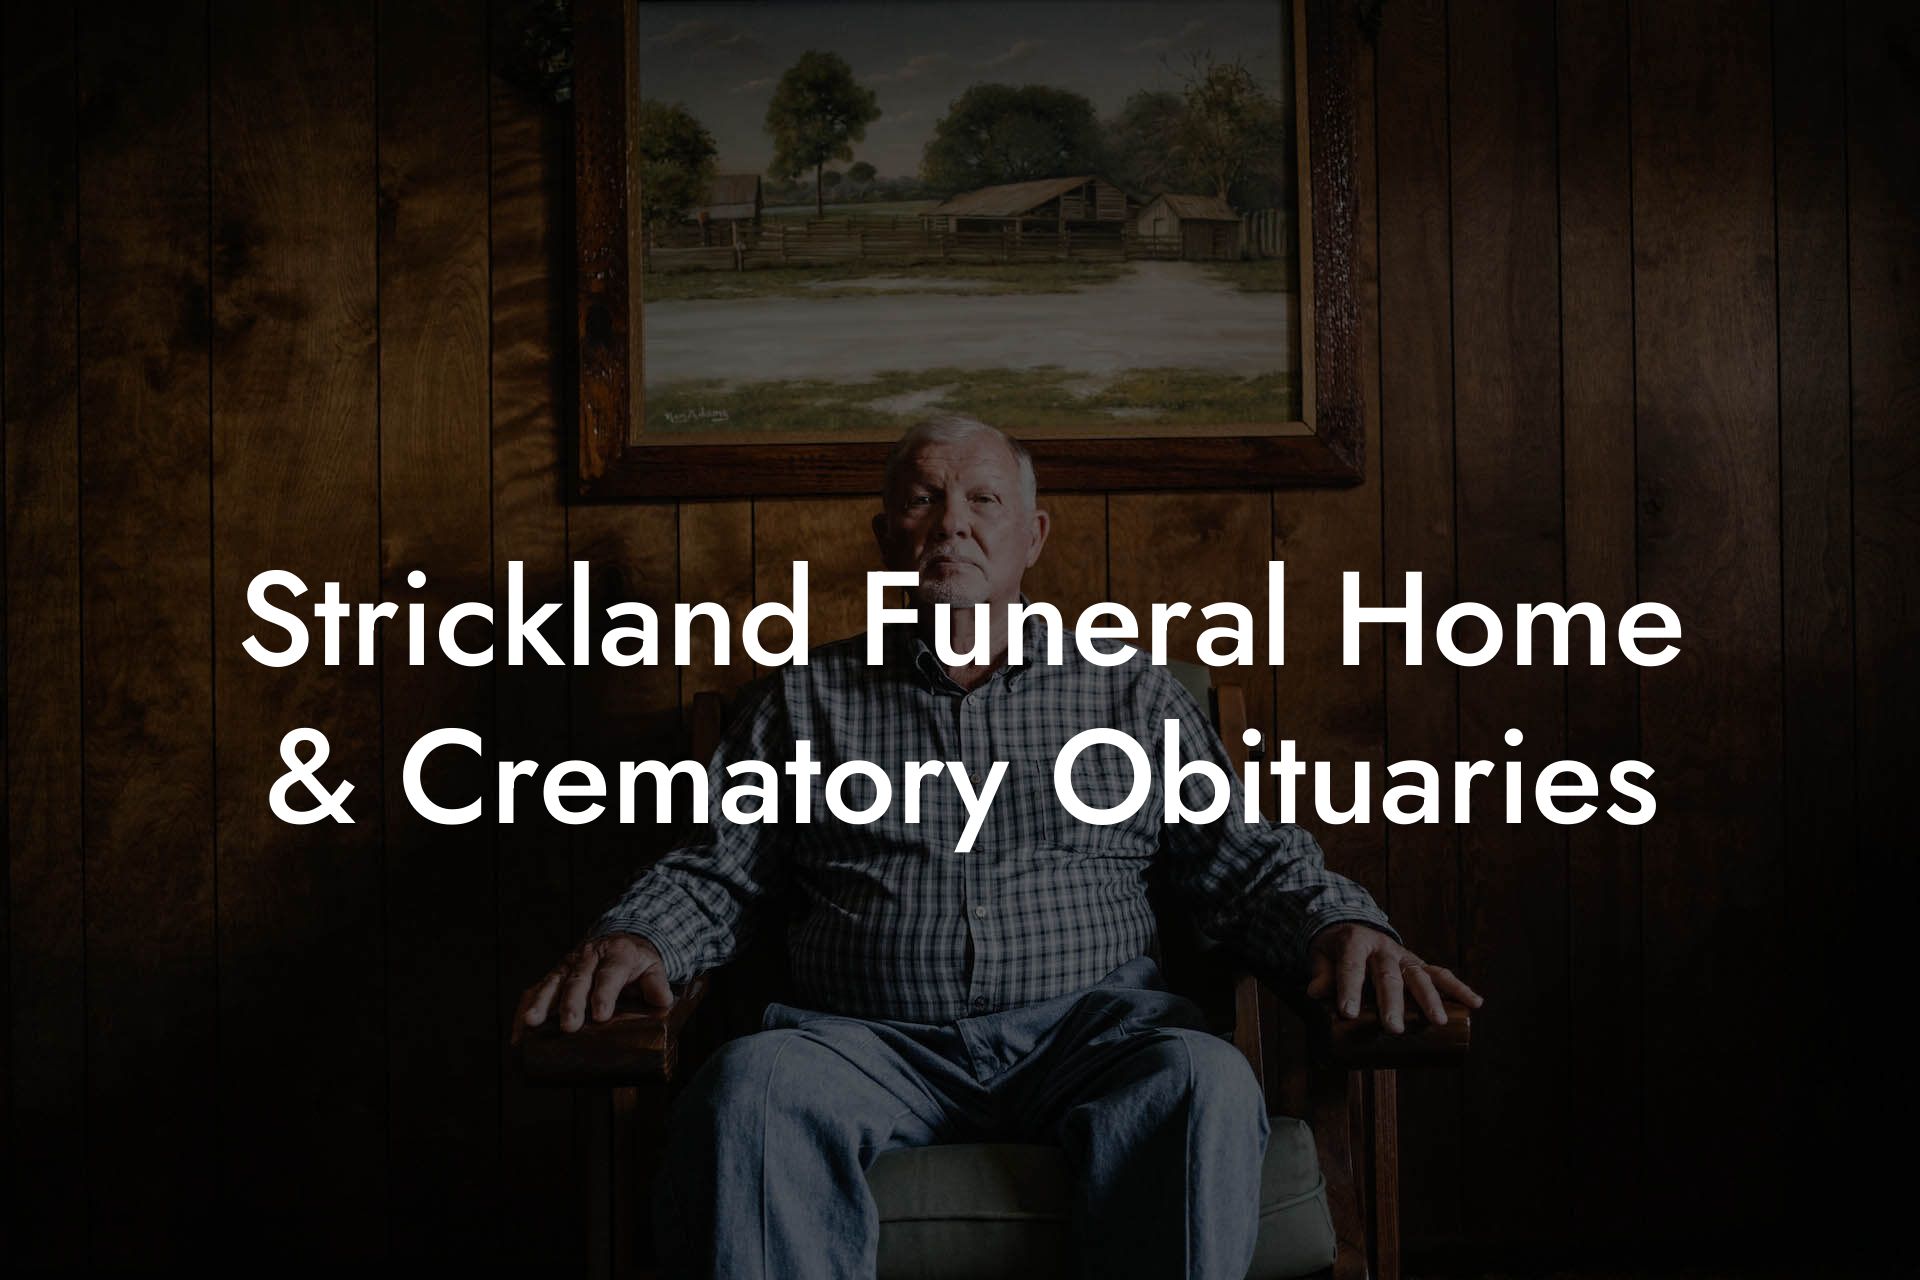 Strickland Funeral Home & Crematory Obituaries